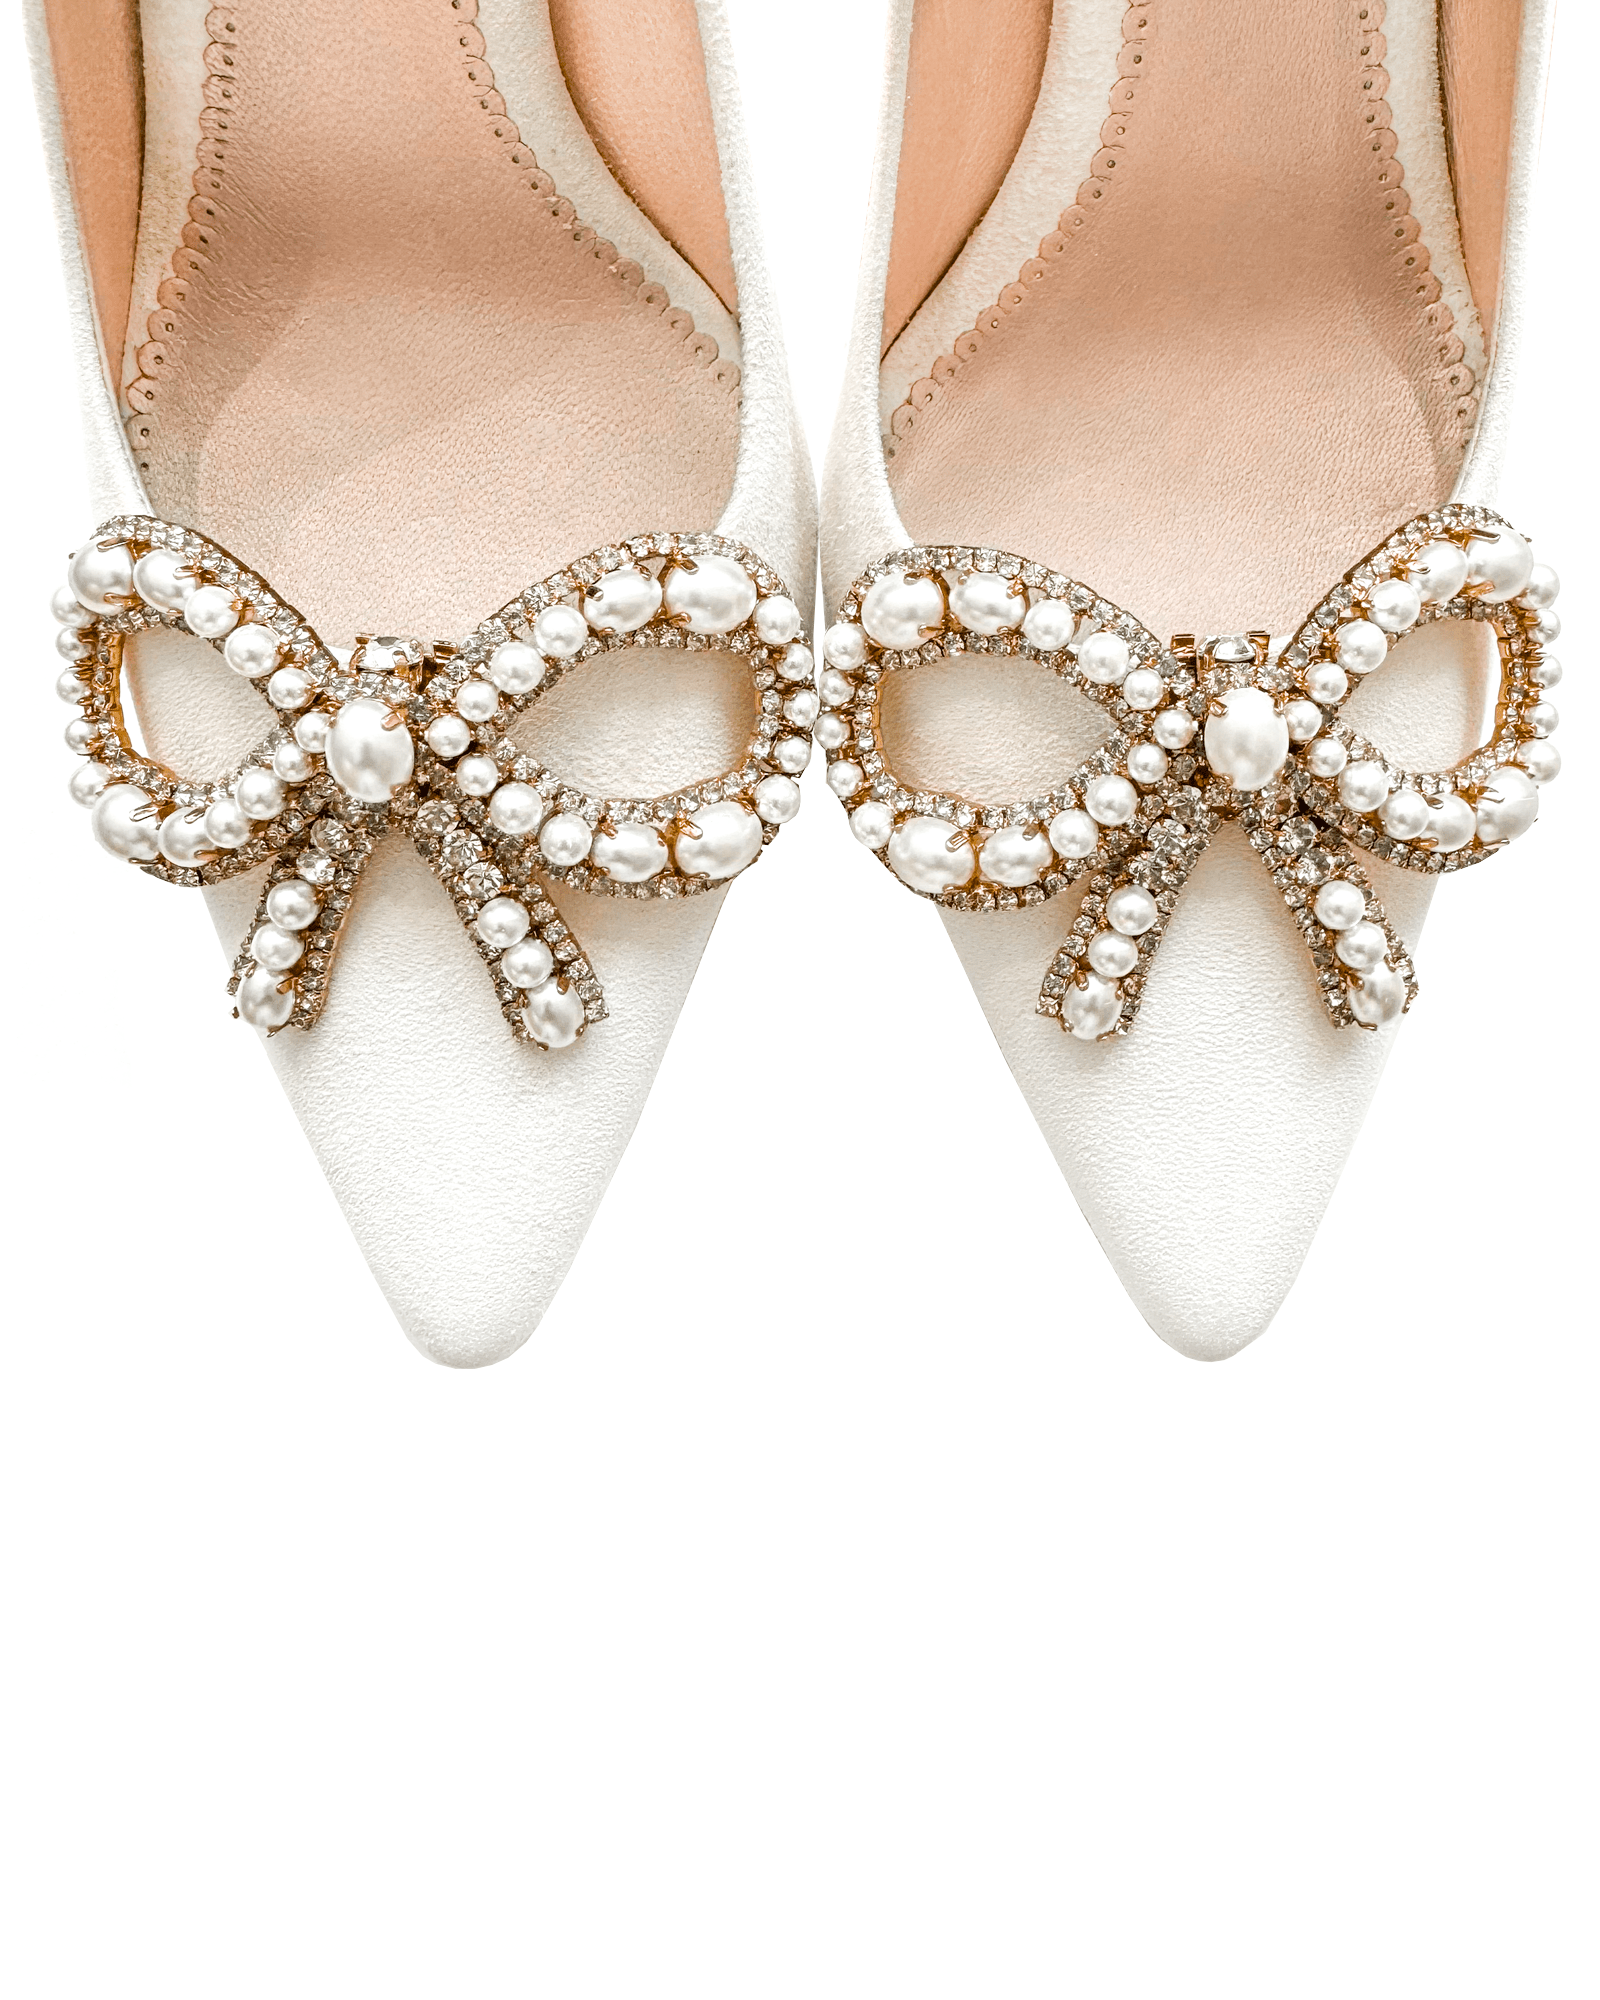 Bronte Pearl & Crystal Bow Shoe Clips image